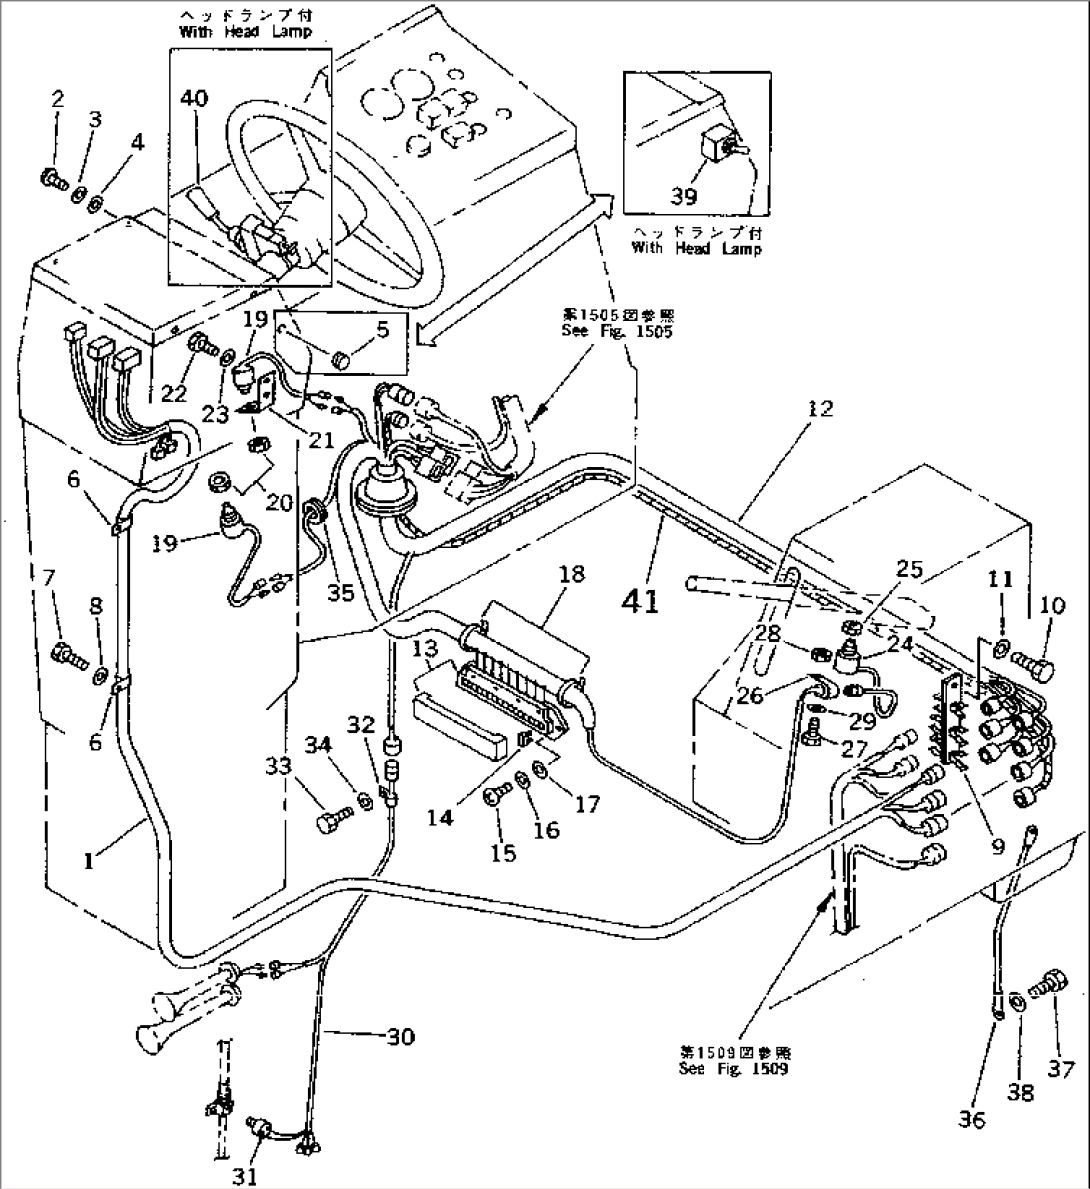 ELECTRICAL SYSTEM (CENTER LINE)